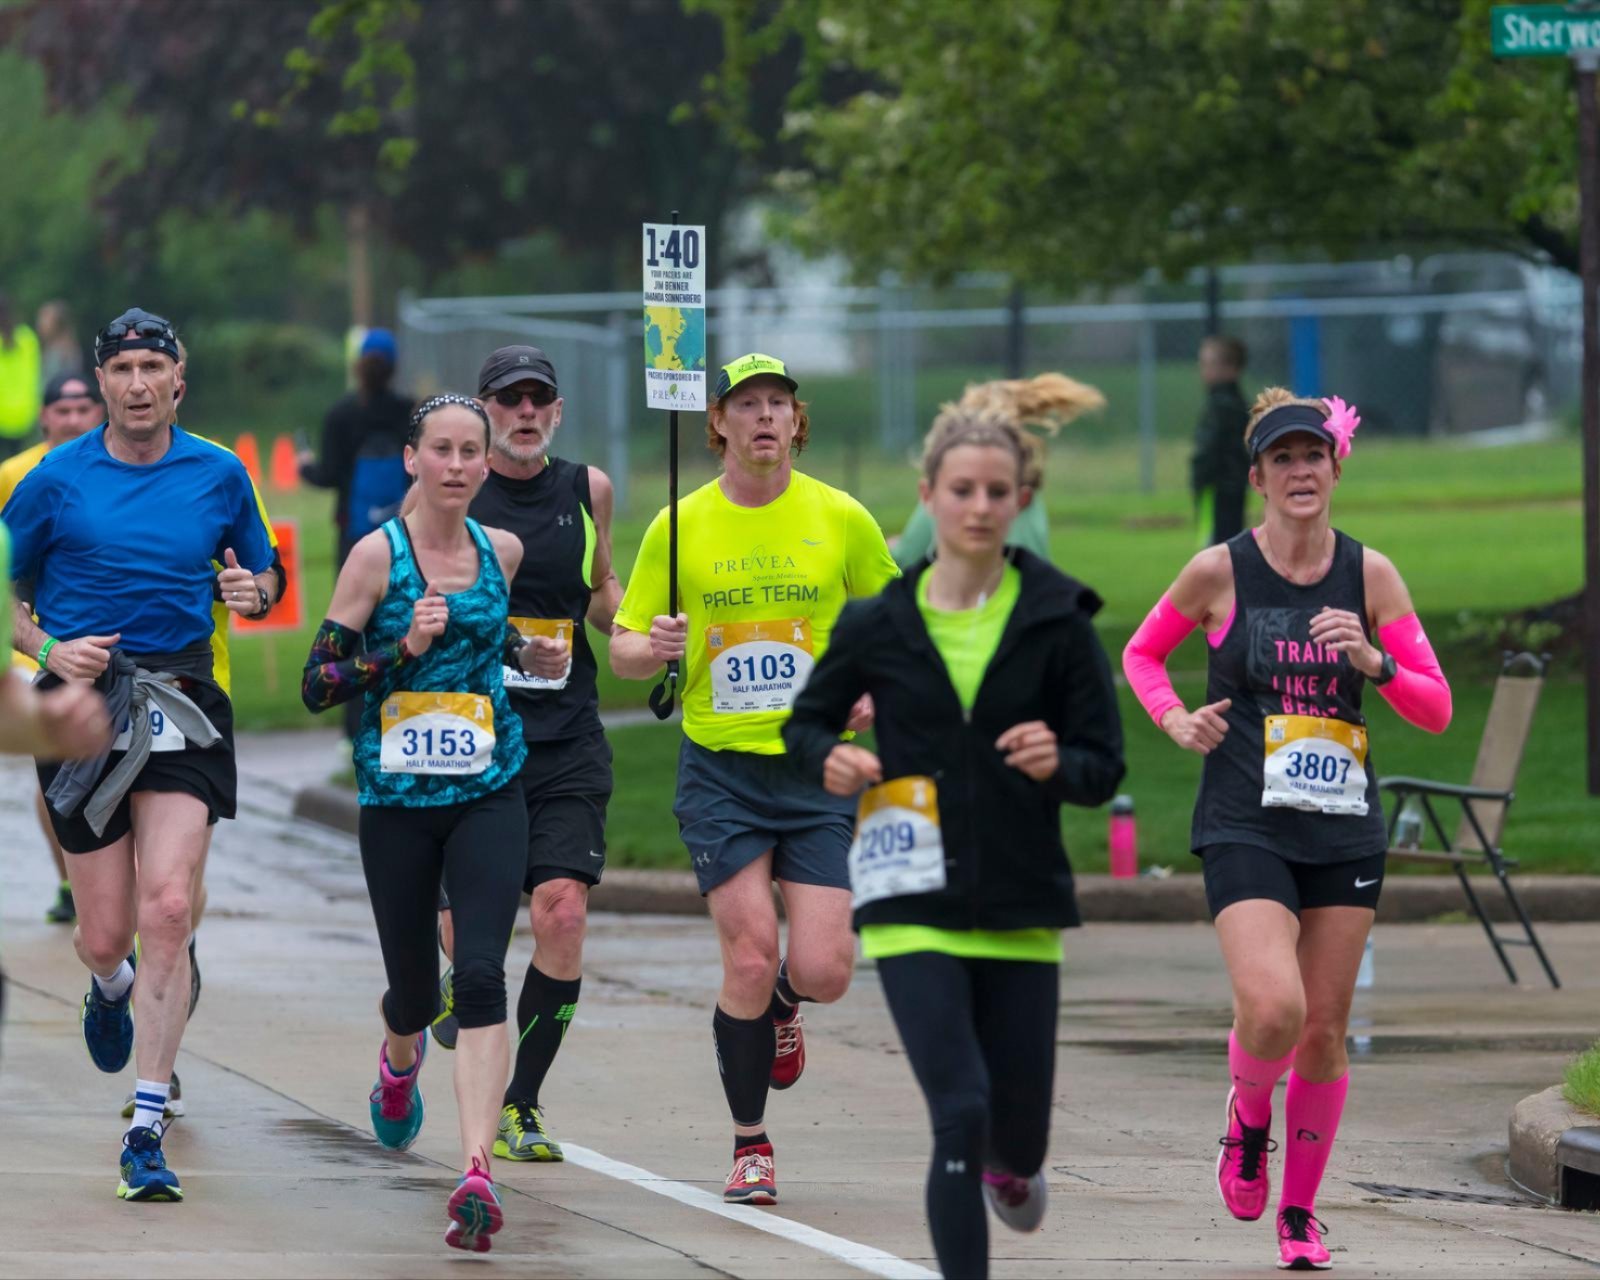 A runner's guide to races and trails throughout Greater Green Bay